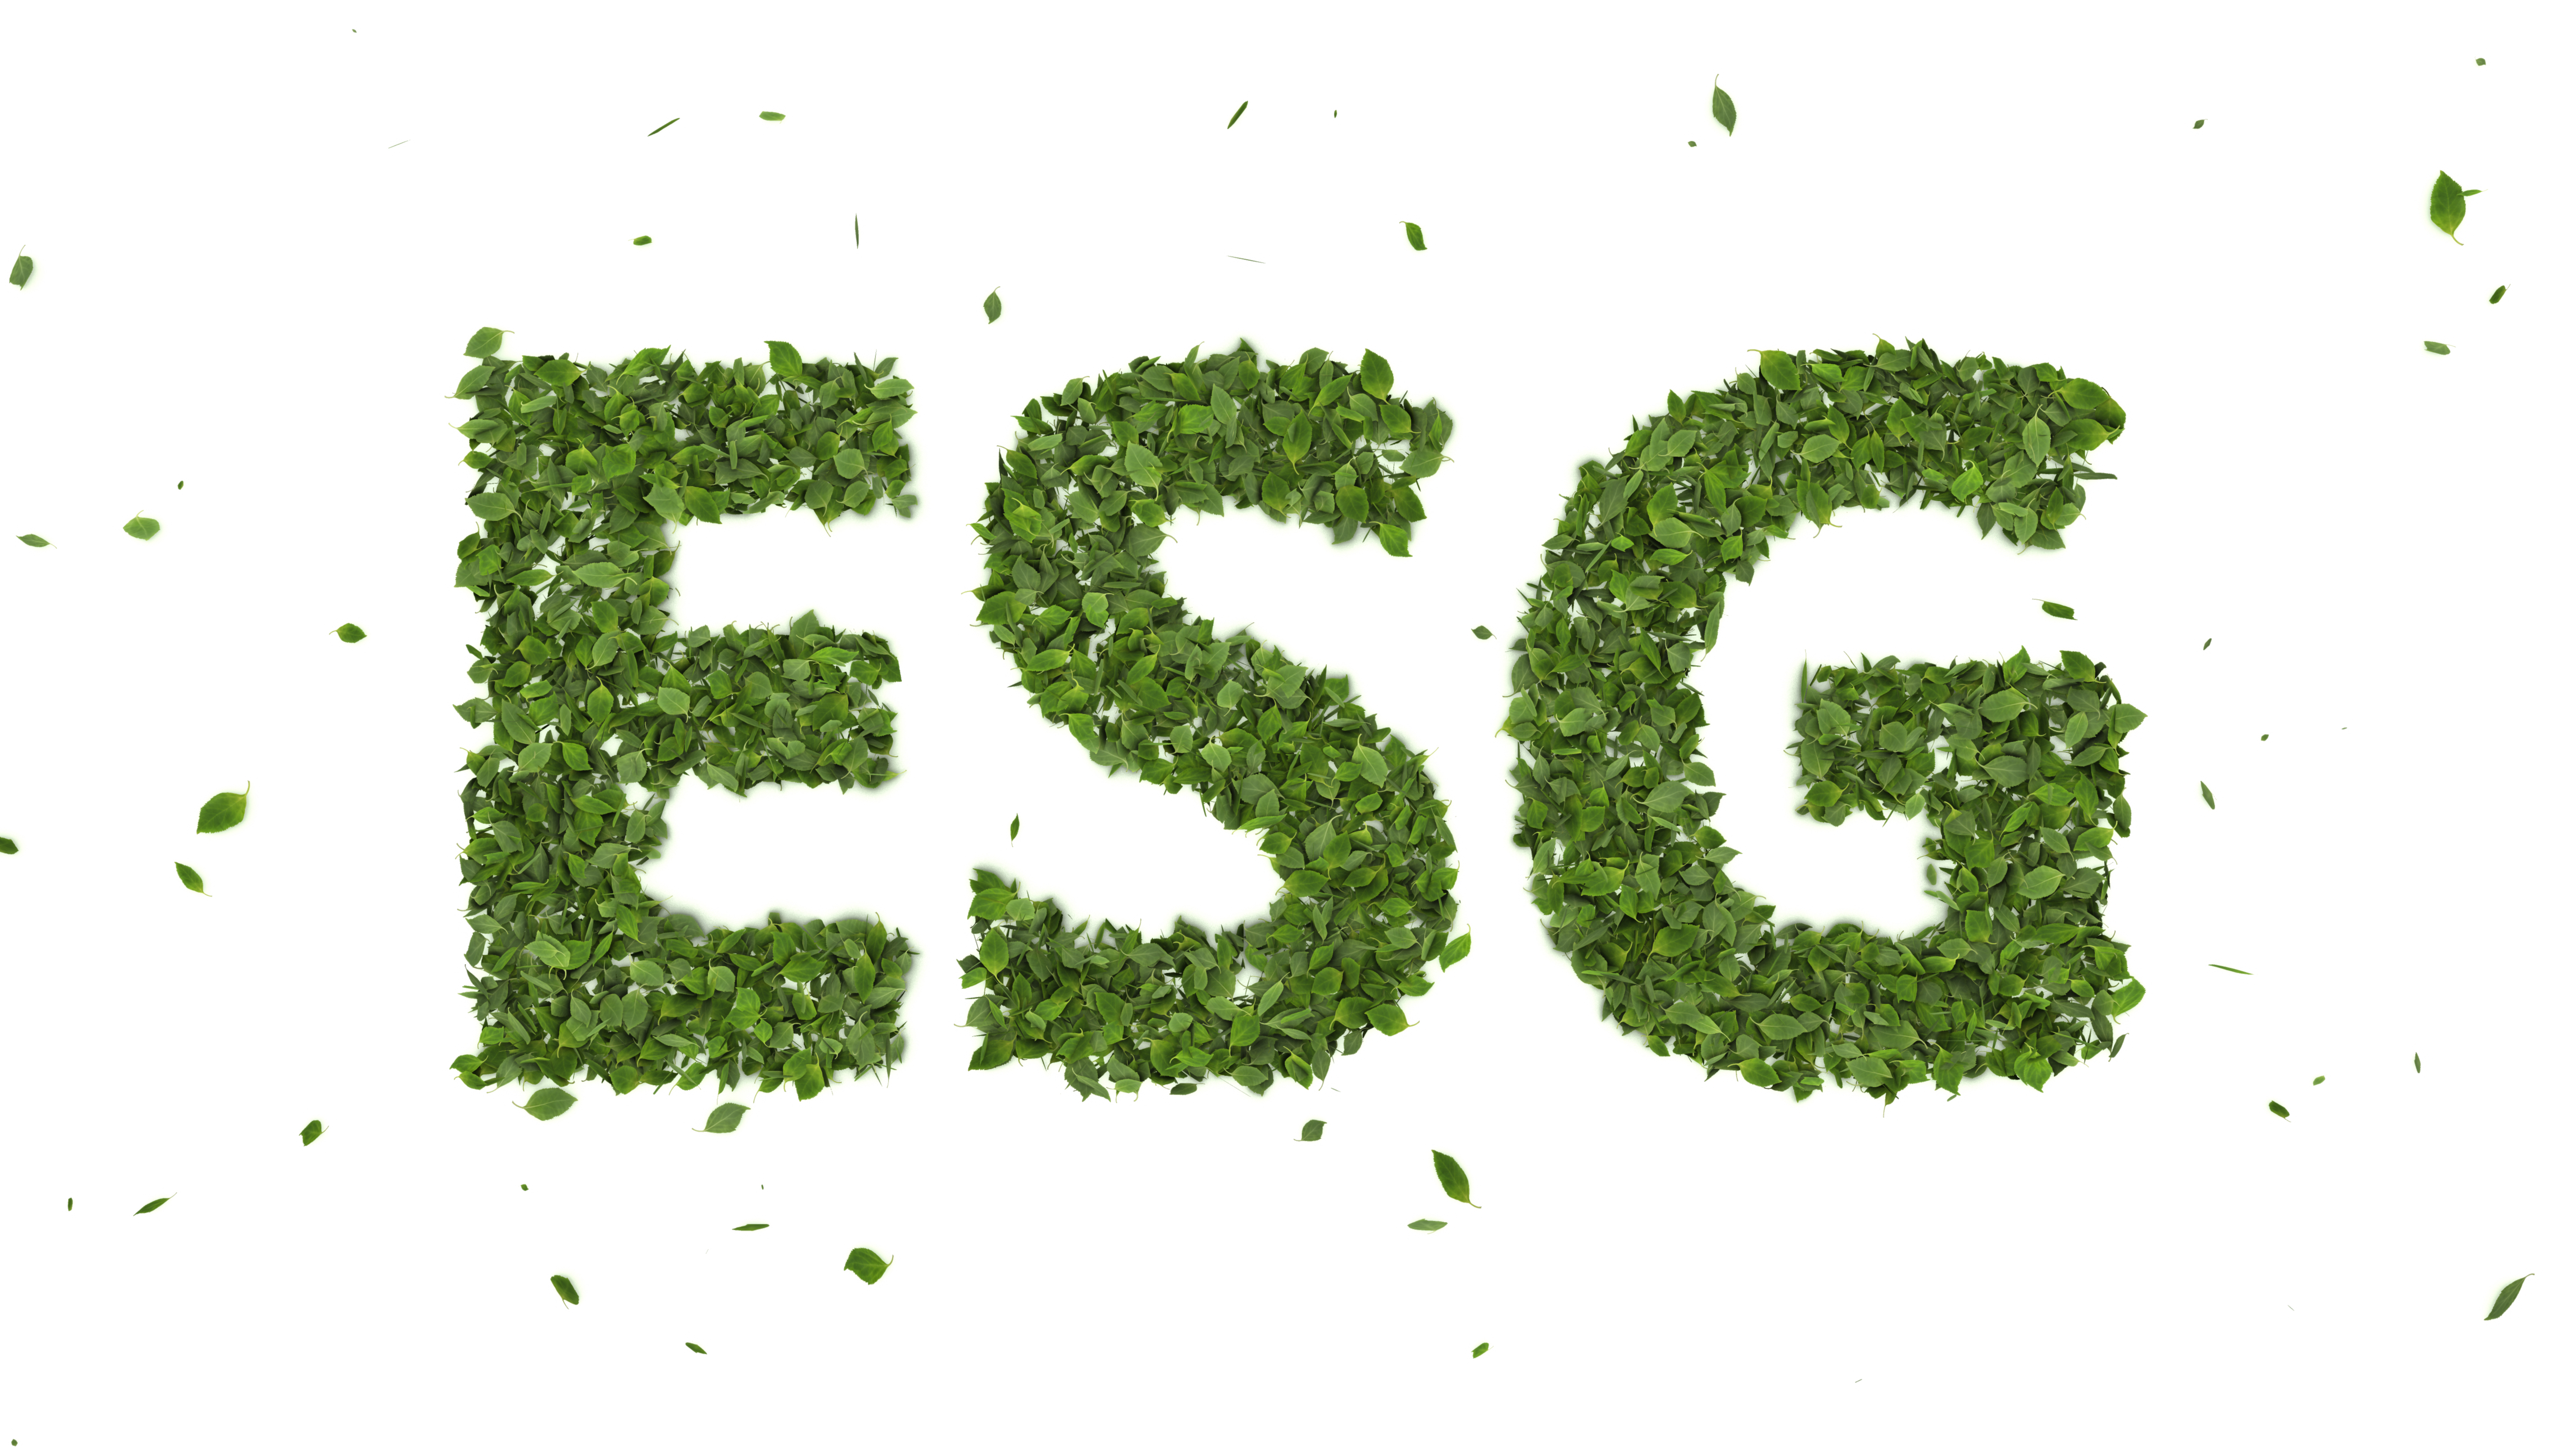 abstract 3d leaves forming esg text symbol on white background creative eco environment investment fund 2021 future green energy innovation business trend